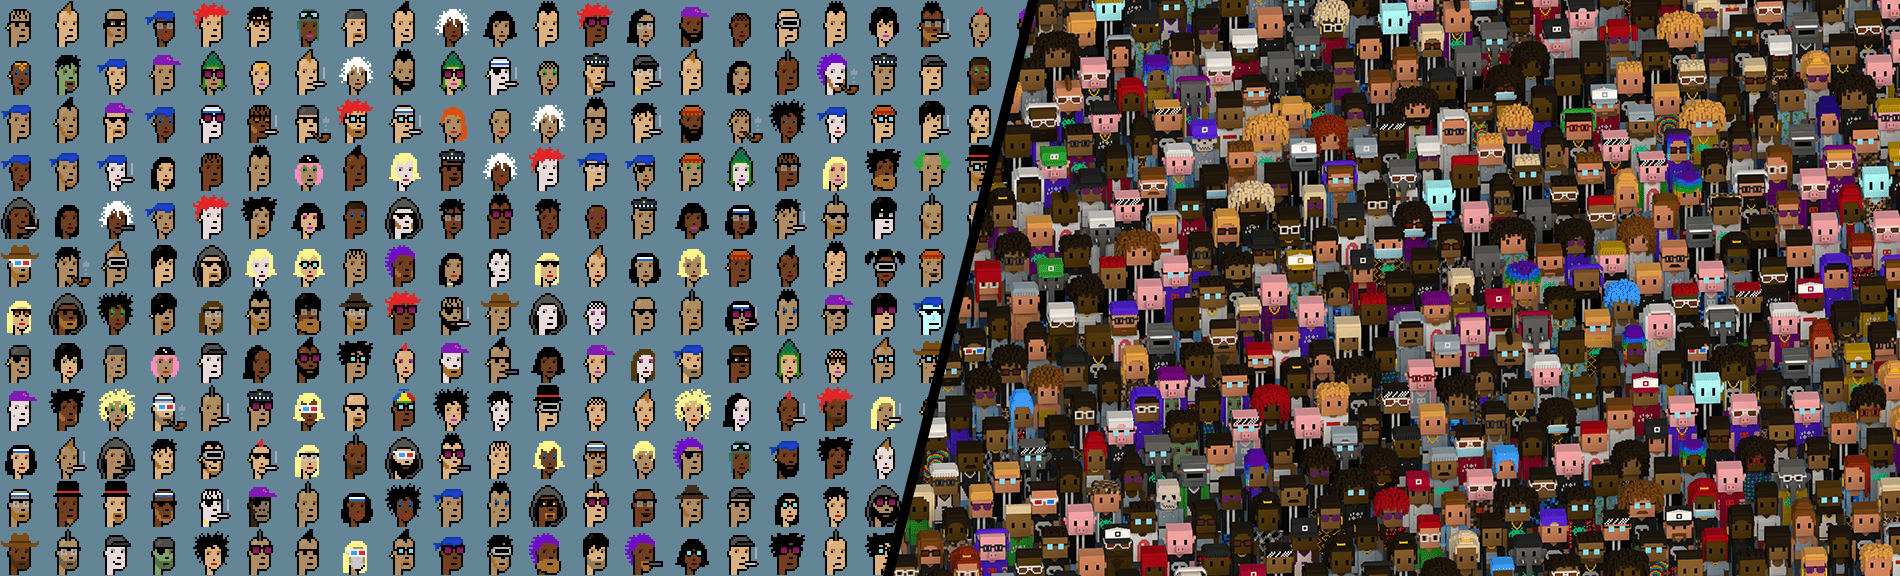 The picture depicts CryptoPunks and Meebits NFTs